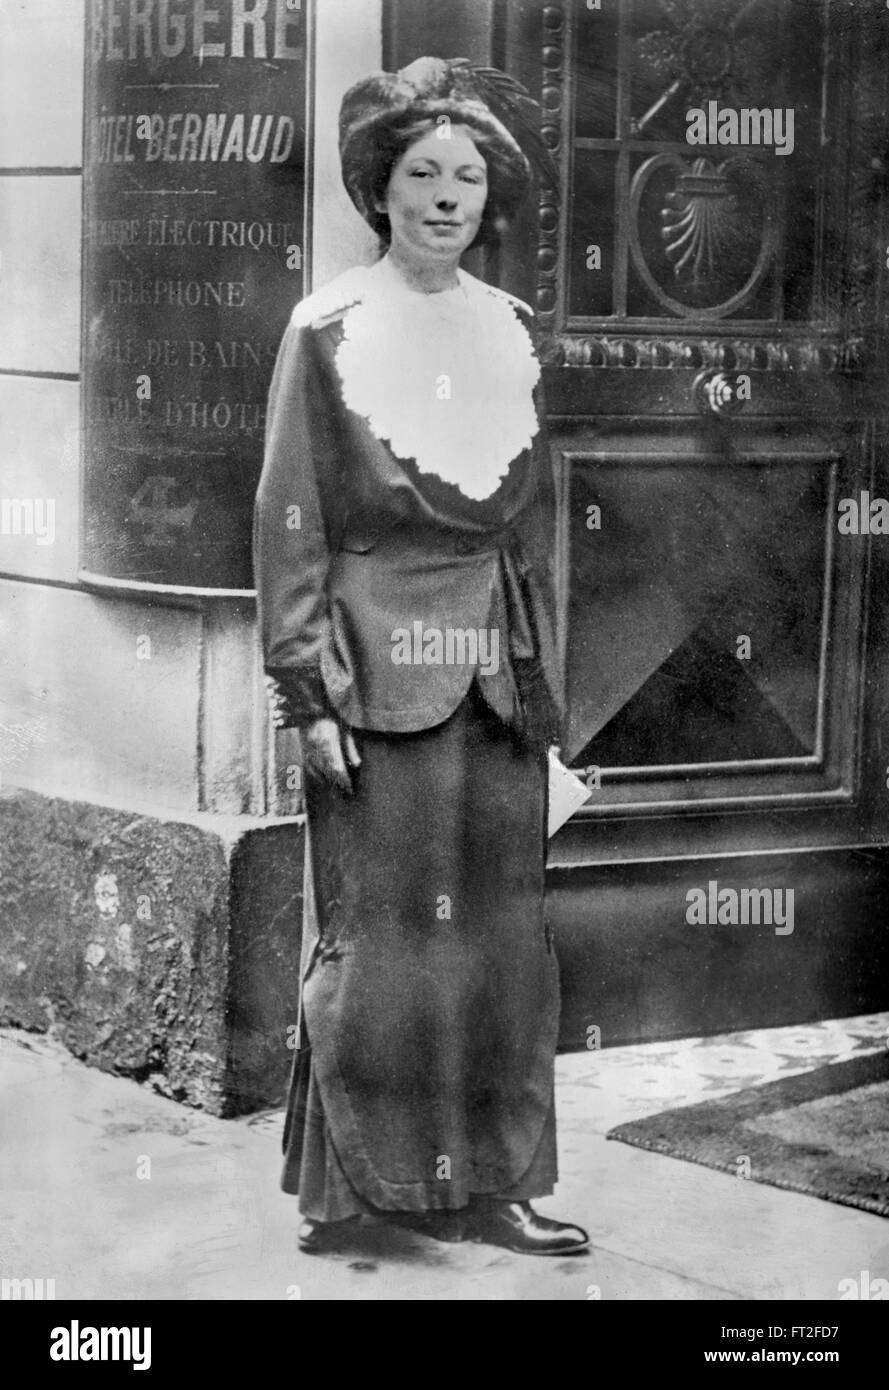 (Dame) Christabel Pankhurst, daughter of Emmeline Pankhurst and co-founder of the Women's Social and Political Union. She directed its militant actions from France in 1912-13. Photo c.1913 from Bain News Service. Stock Photo